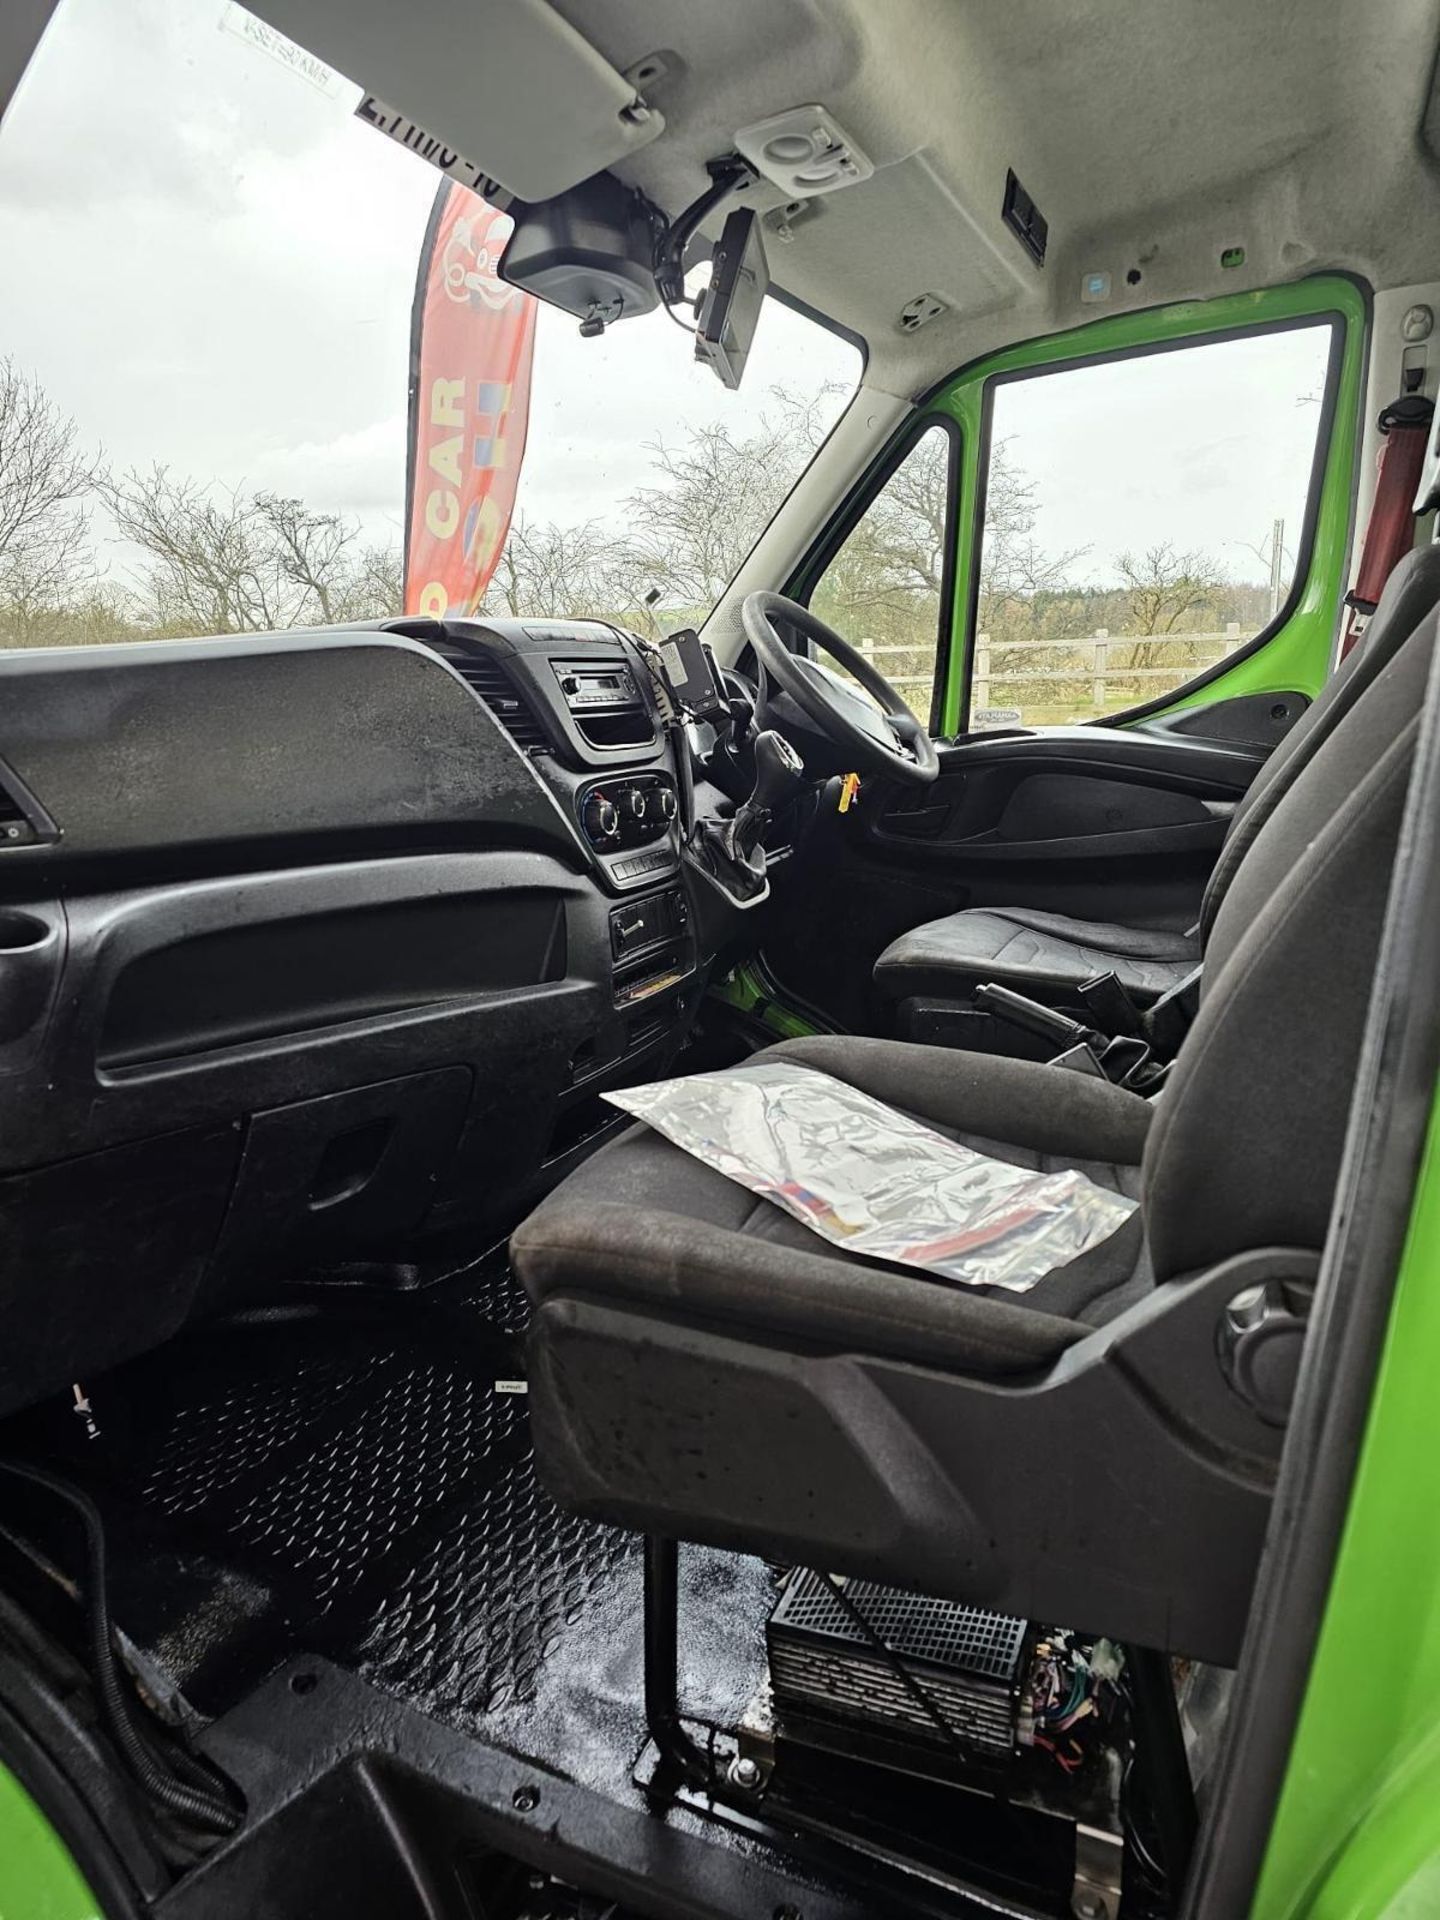 2018 IVECO DAILY 35S12 AUTOEURO6 CHASSIS CAB - Image 4 of 11